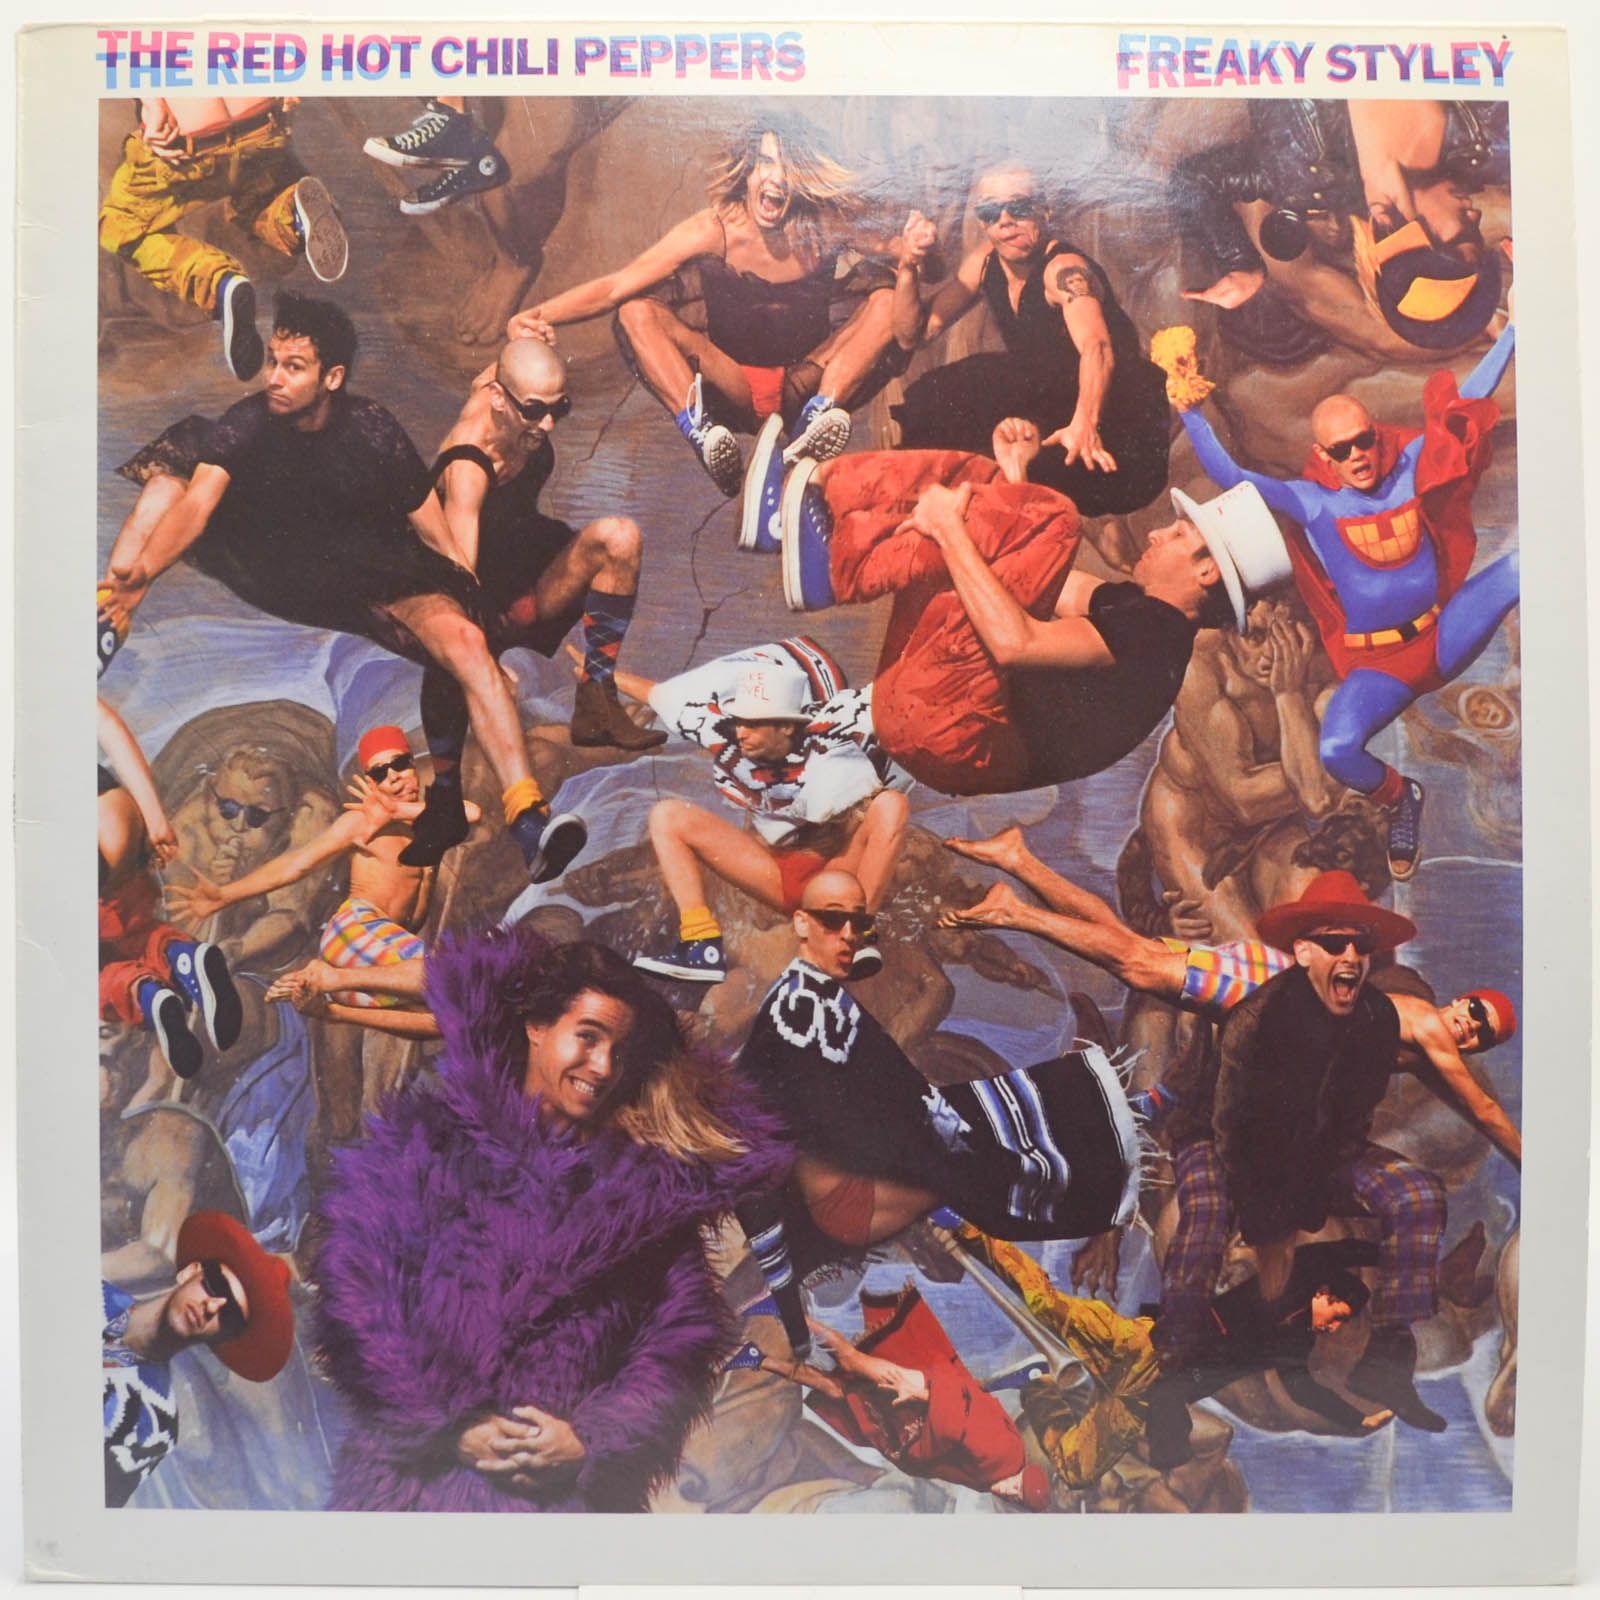 Red Hot Chili Peppers — Freaky Styley (UK), 1990